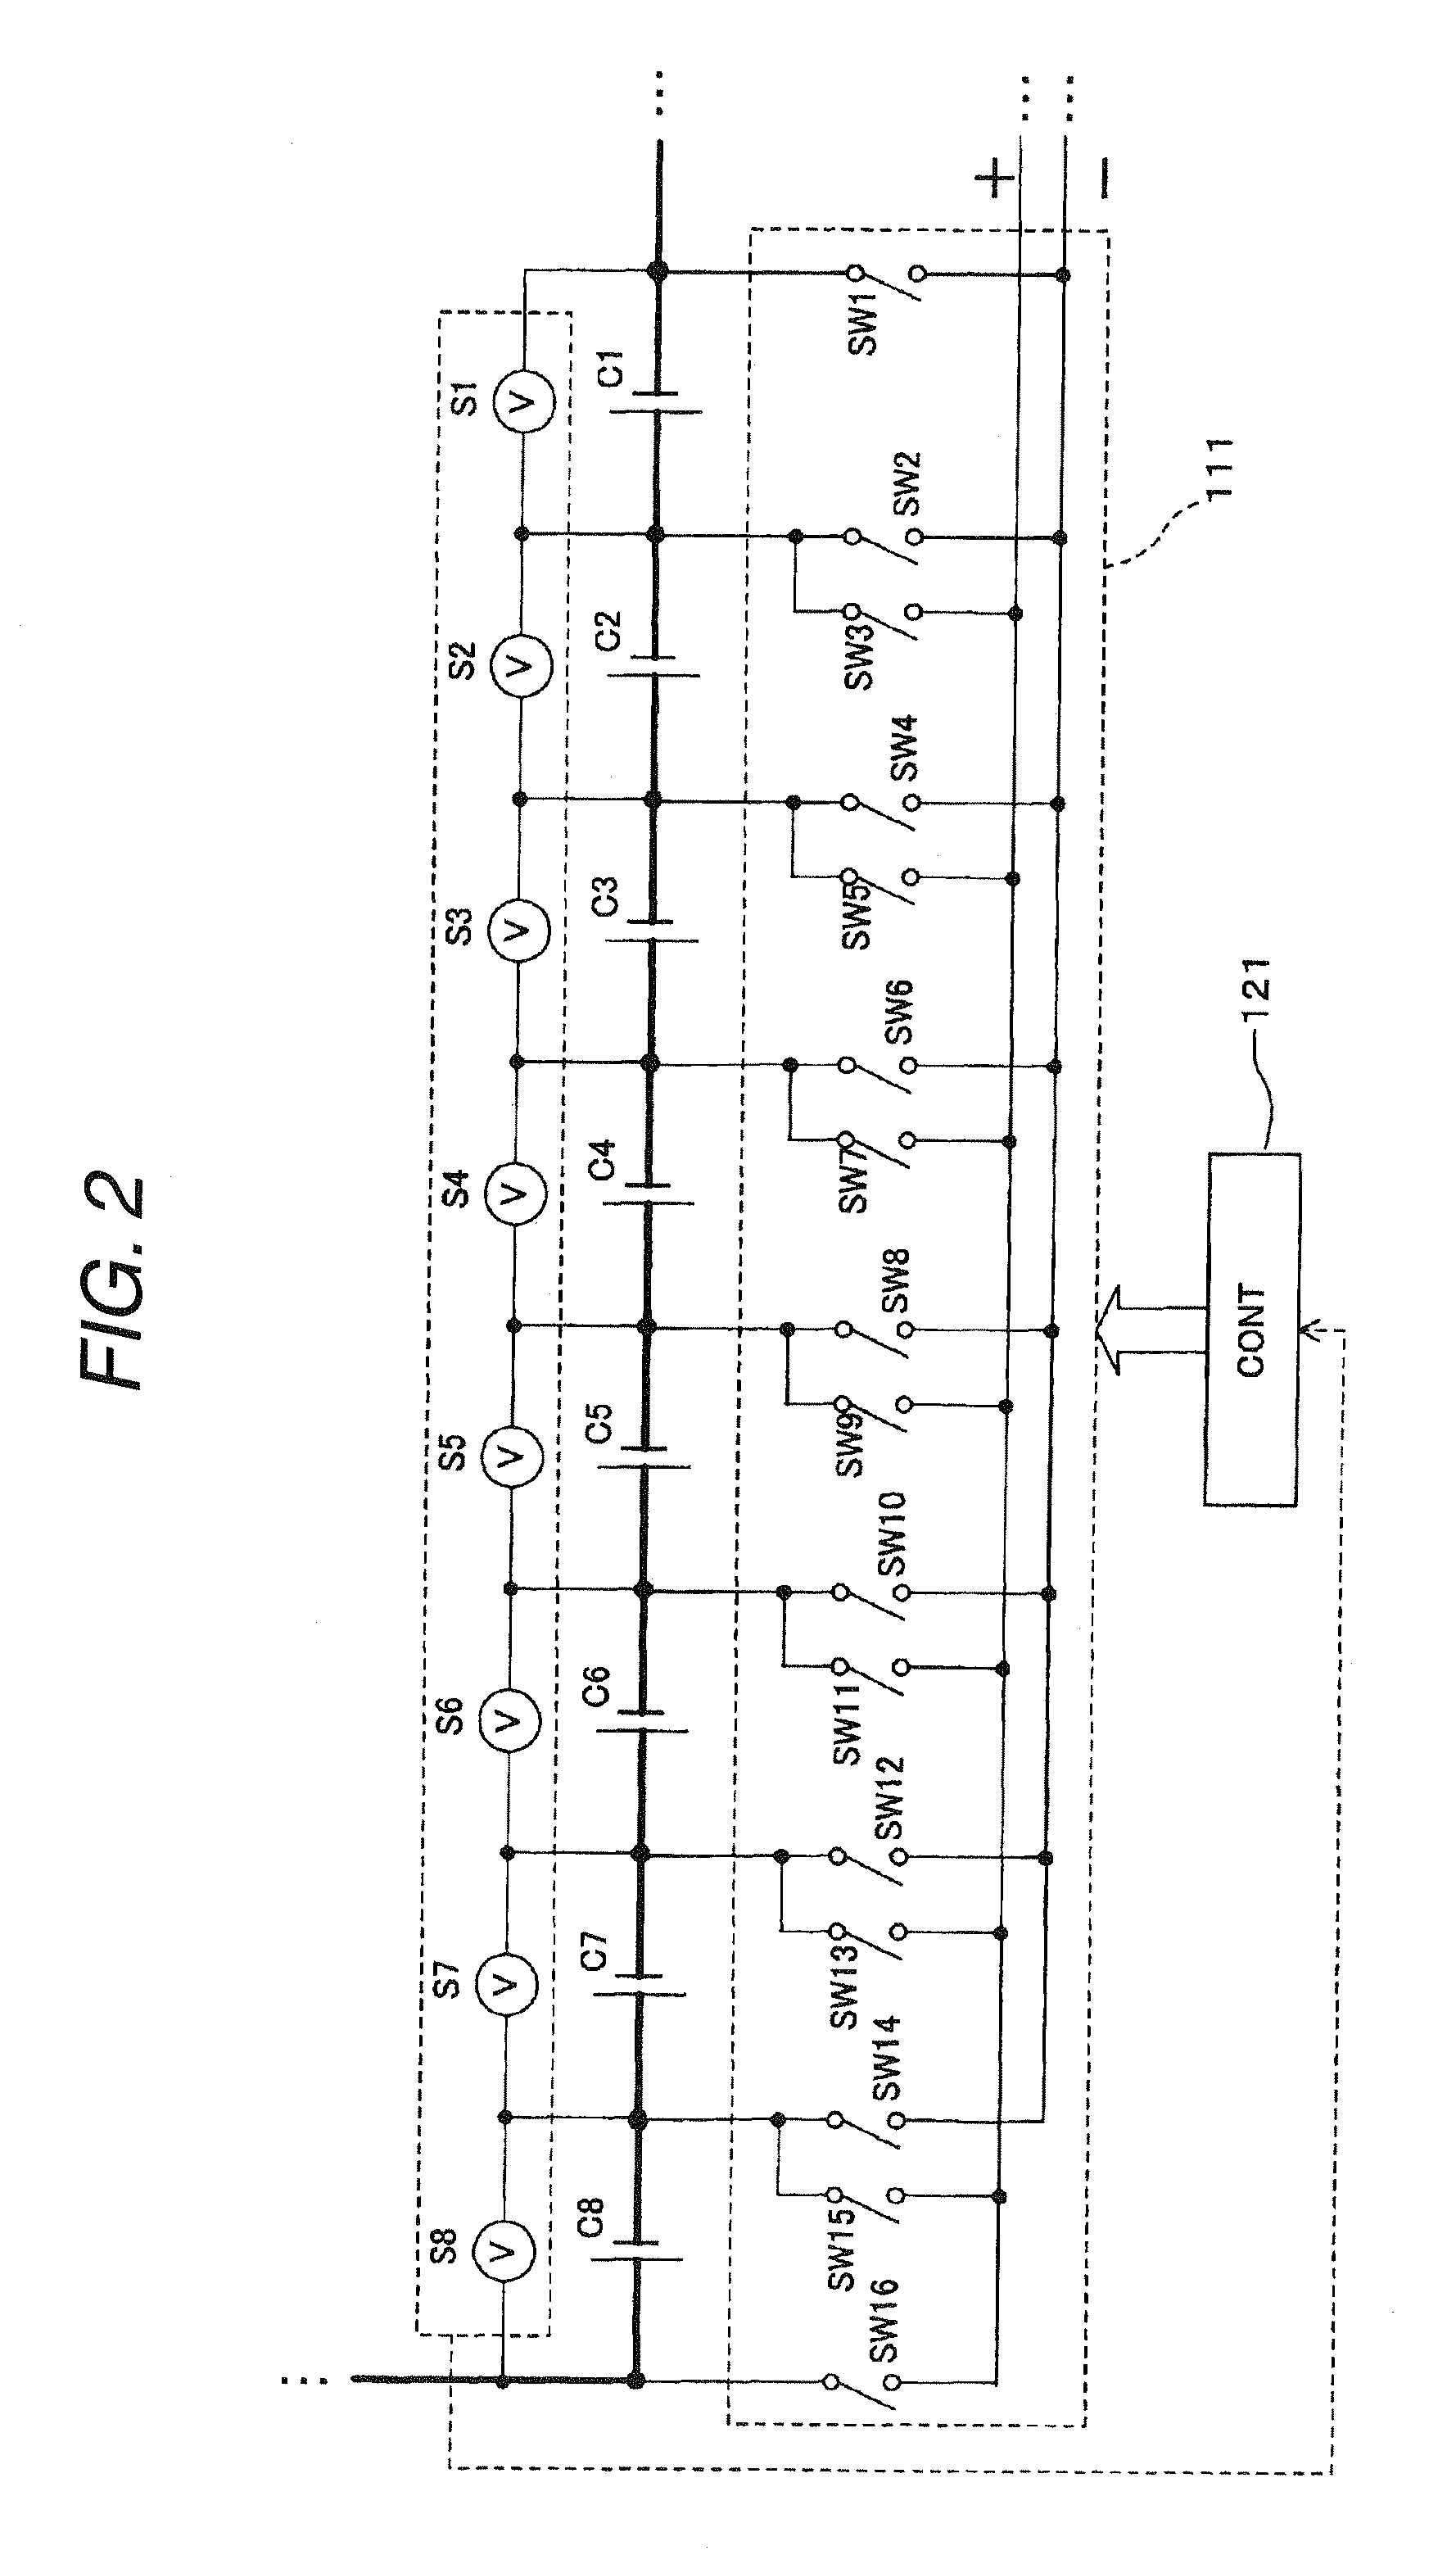 Discharge control system